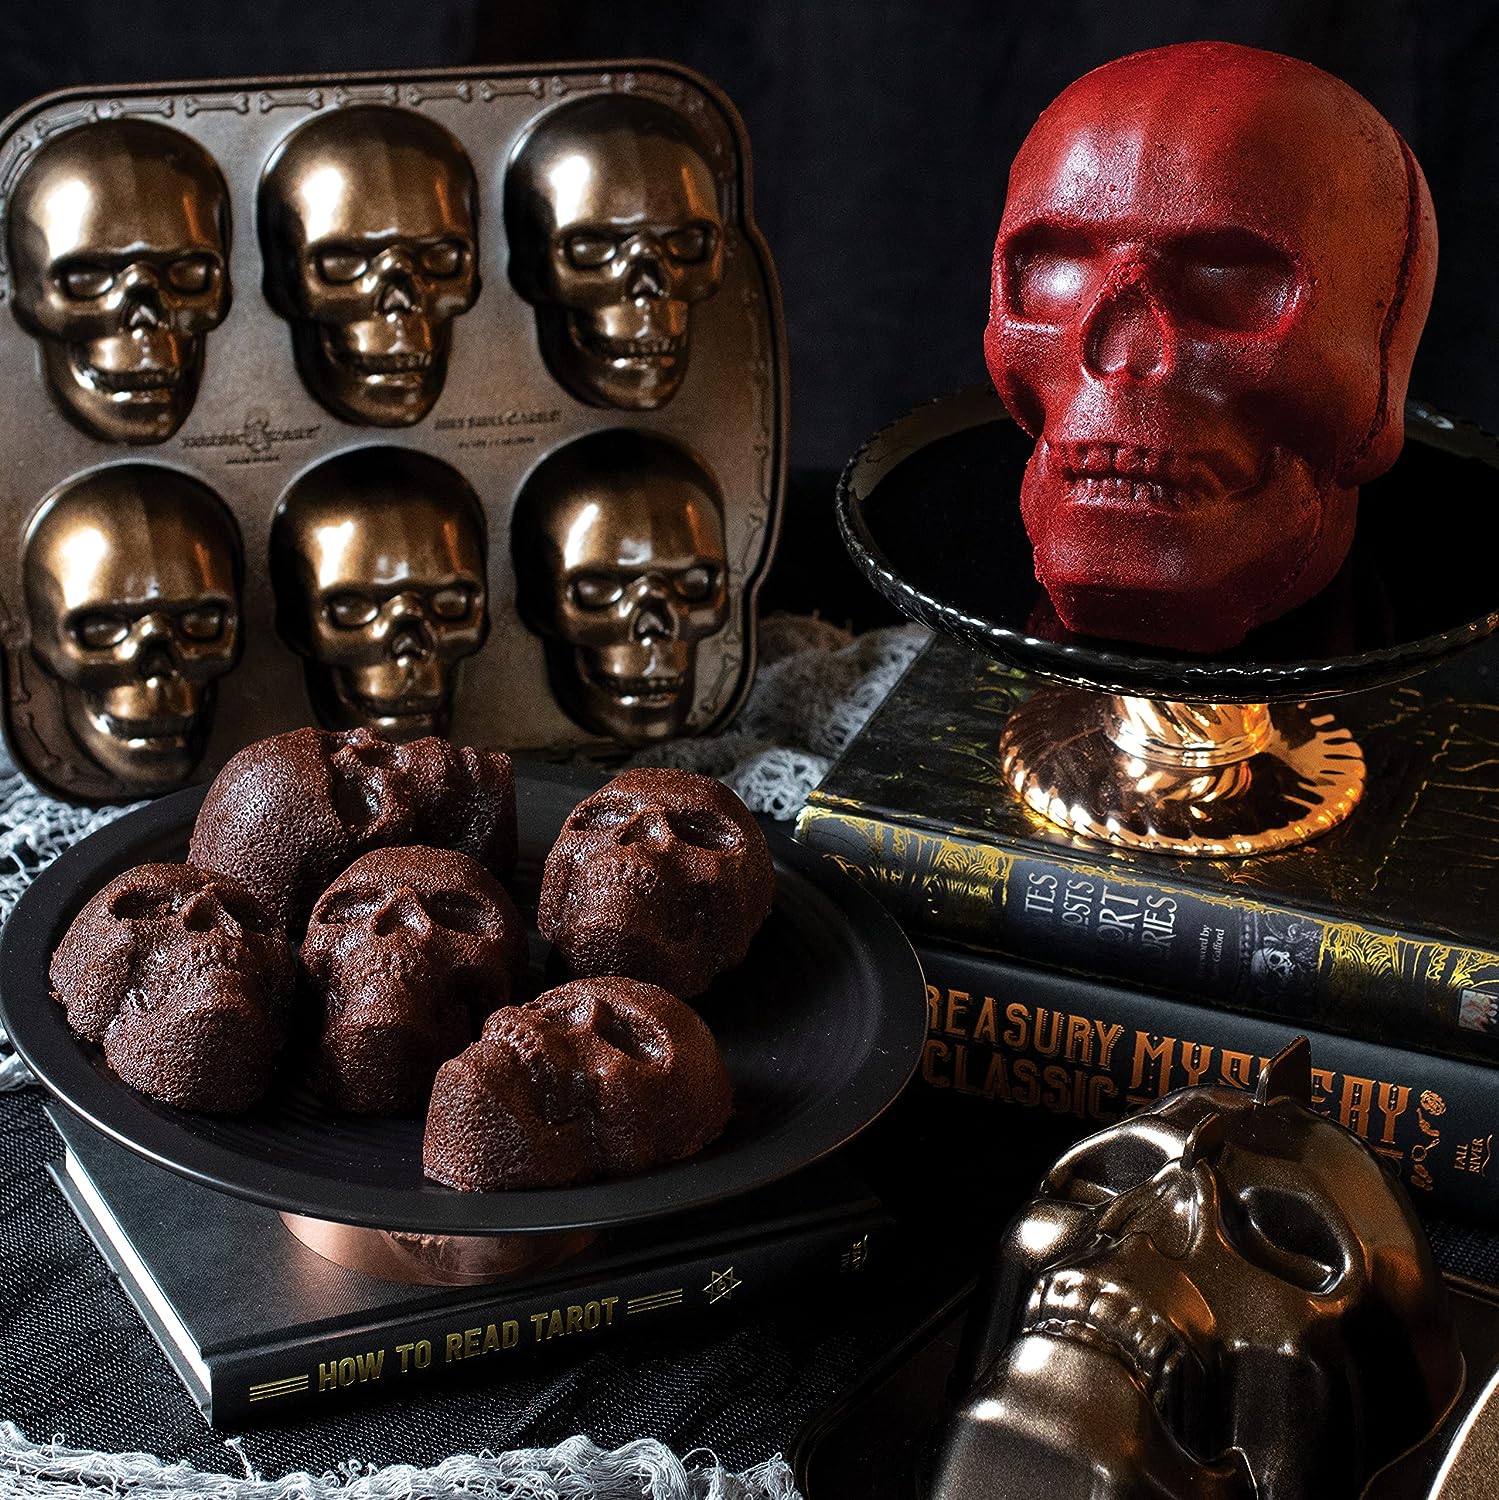 Large-Skull Baking-Pan Moulds Halloween-3d Silicone - Skull Mould Haunted, Skull  Cake Pan, Cake Mould, Halloween Moulds, 3d Skull Cake Mould, Skull Silicone  Mould, Moldes de Silicona para Reposteria by ZhiJue - Shop